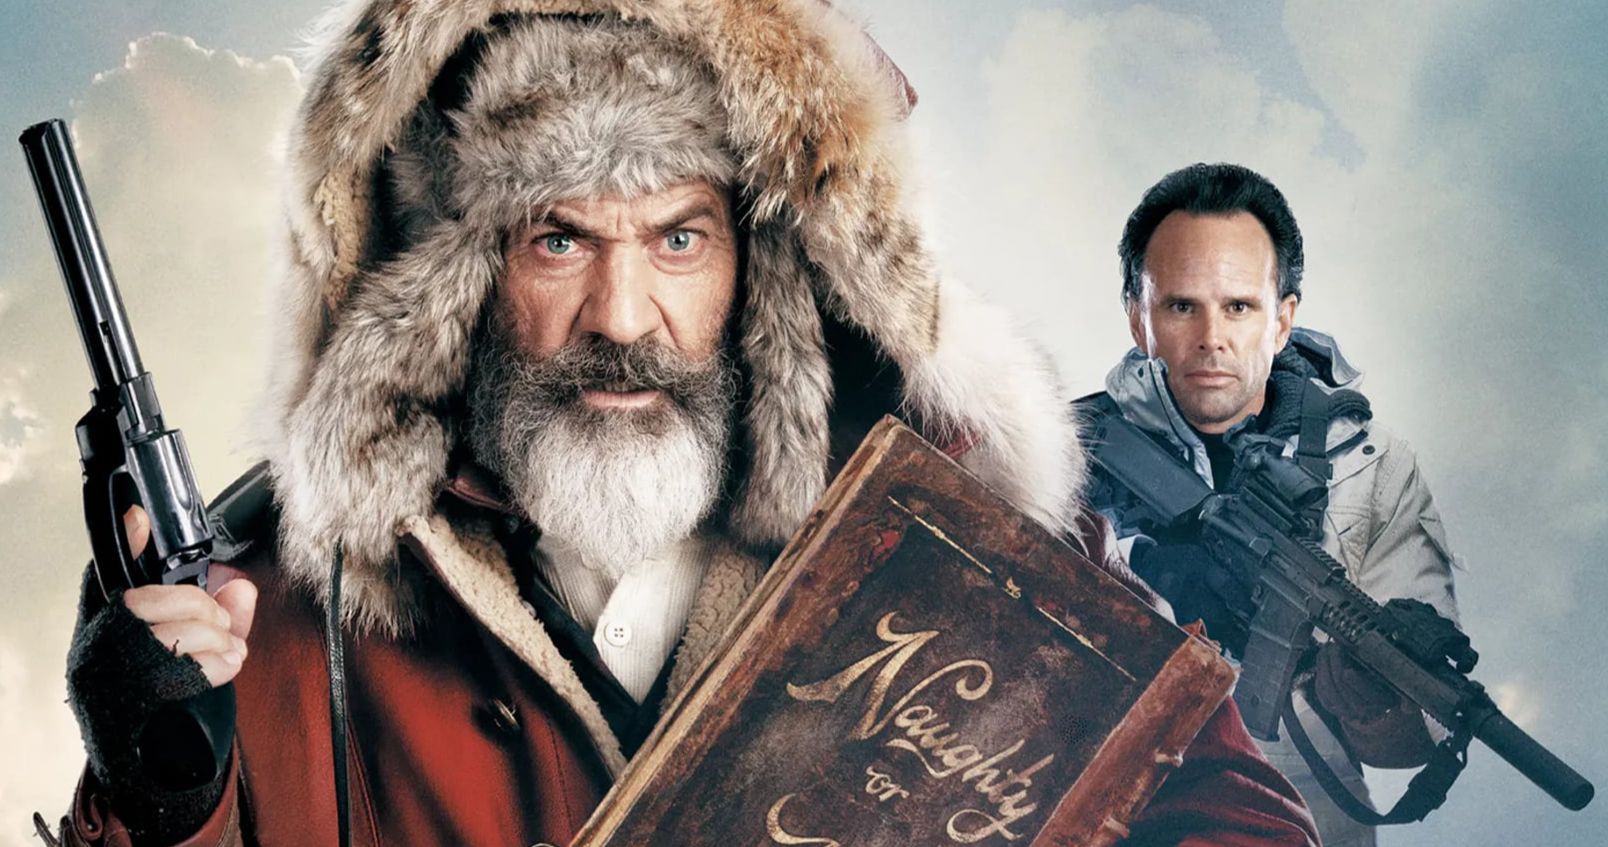 Mel Gibson Talks Fatman and His Wild Ride as Santa in Exclusive Cast Interviews